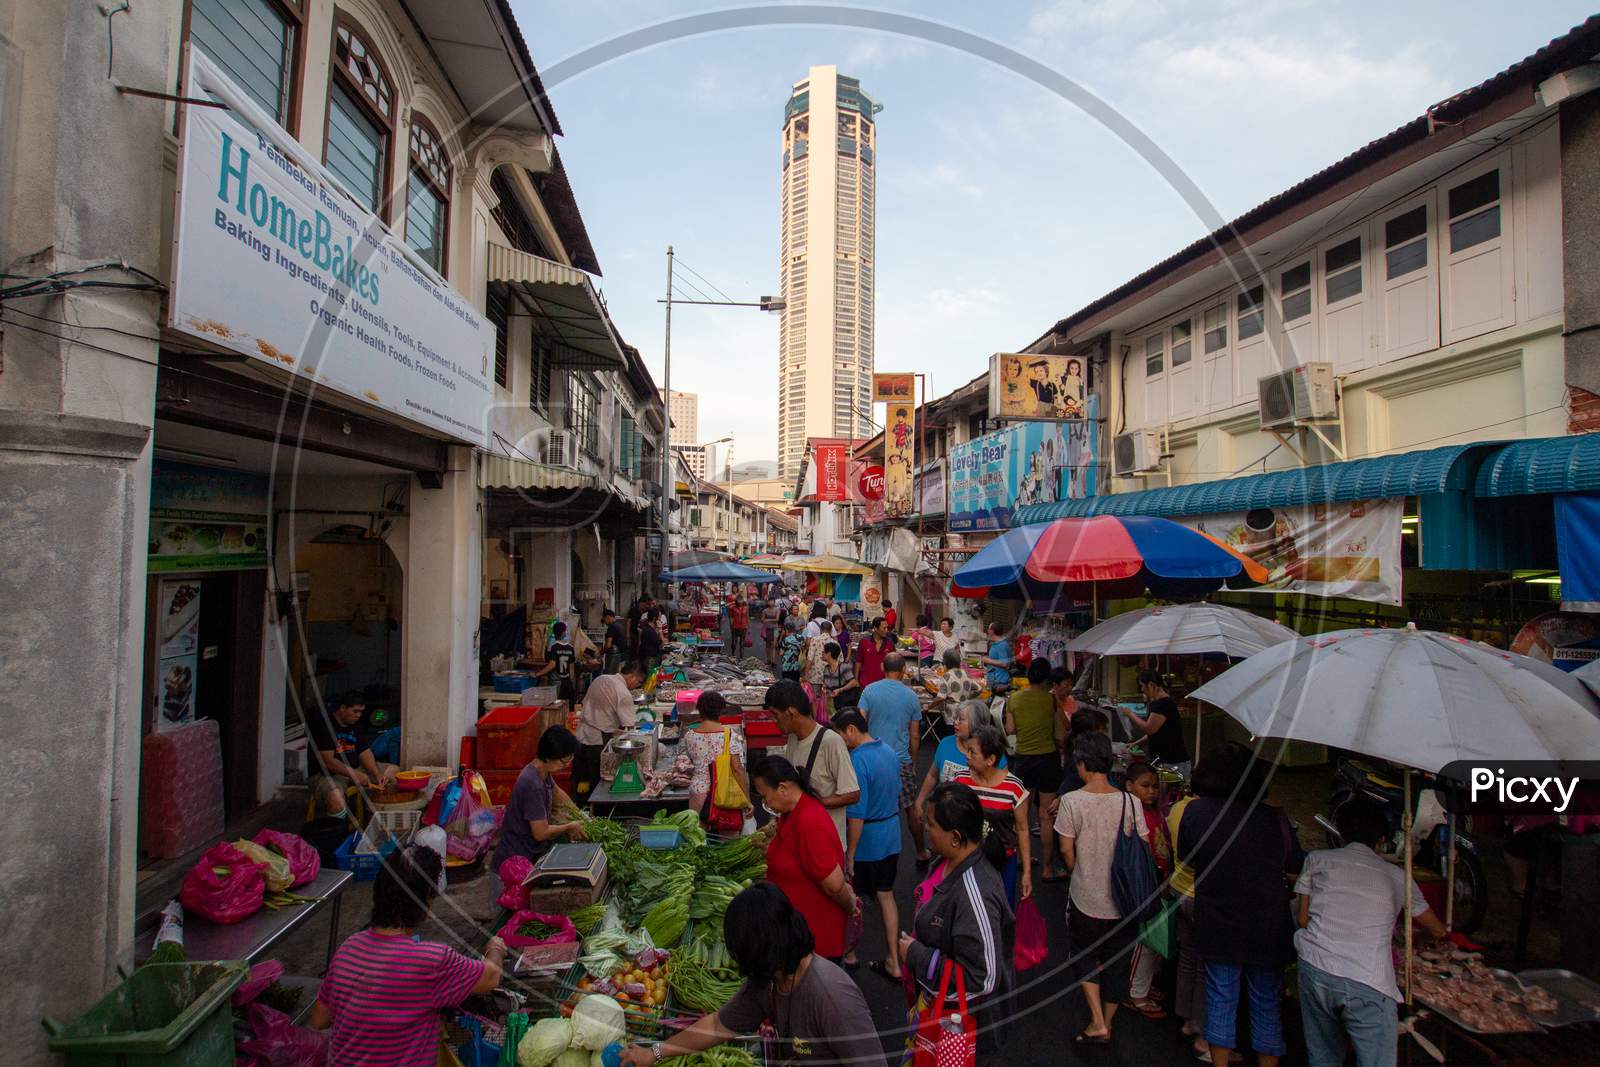 People Buy Vegetable, Seafood And Meat At The Wet Market